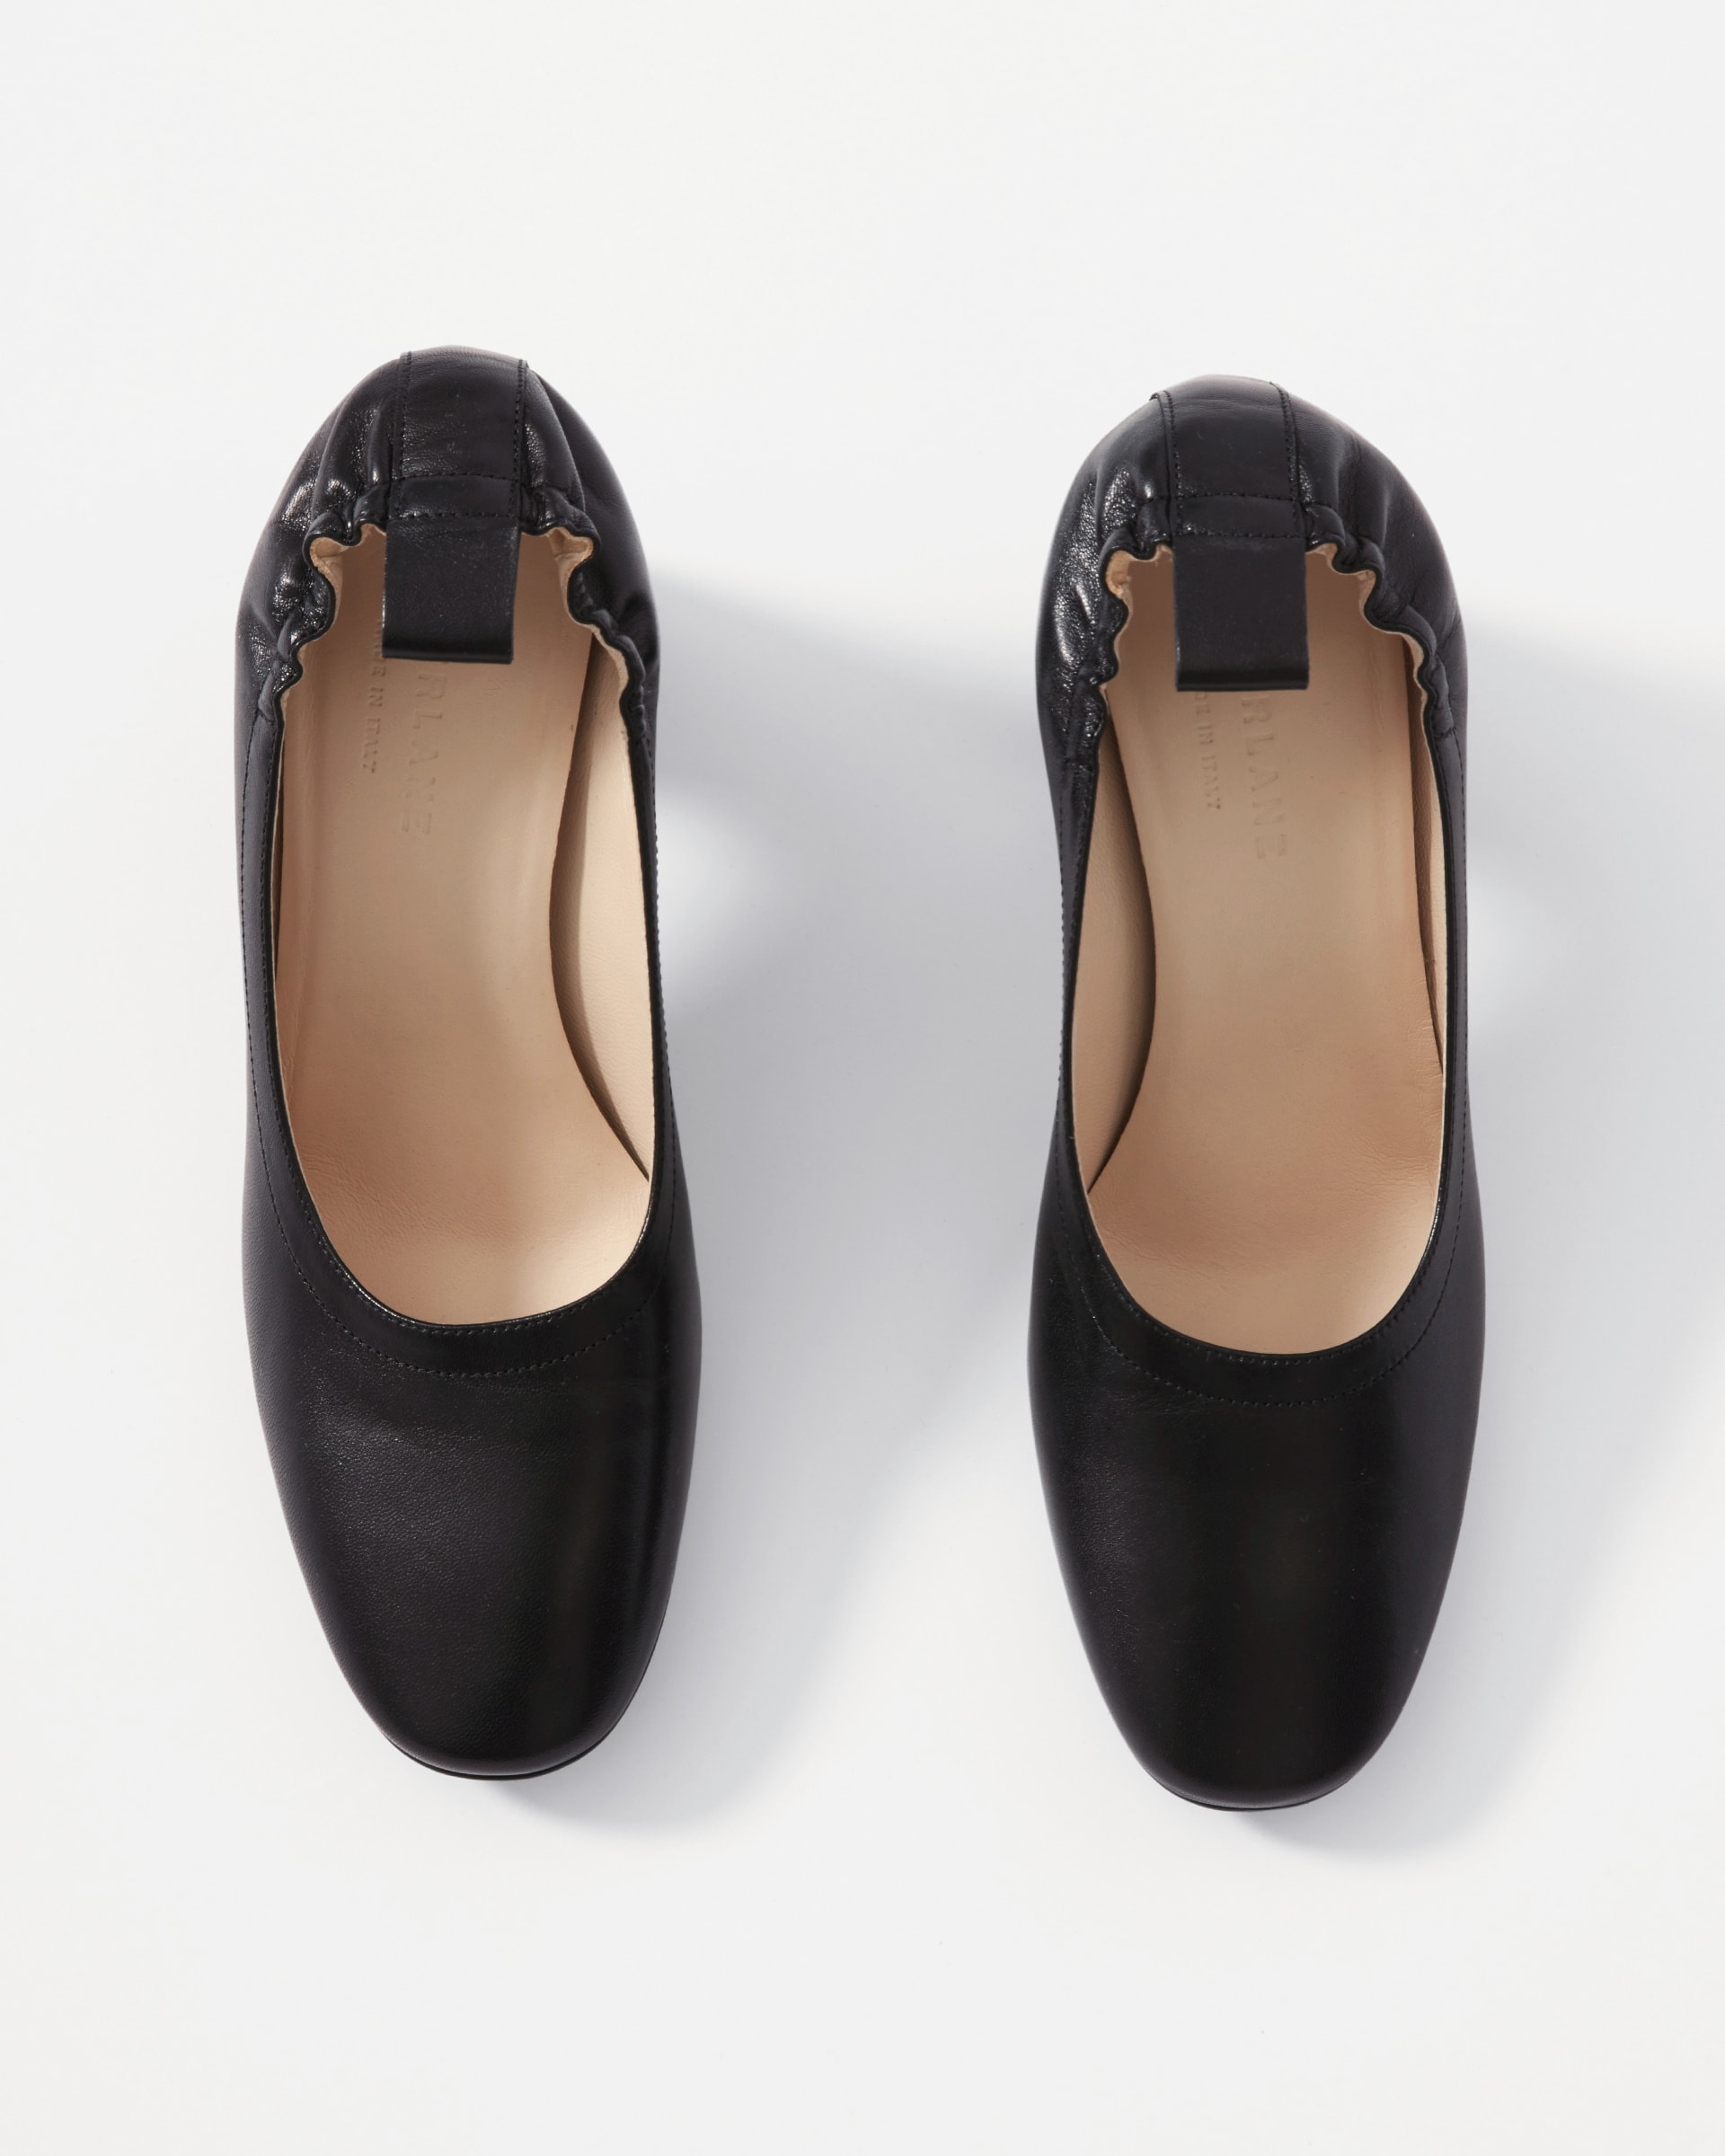 The Day High Heel Black Stacked – Everlane